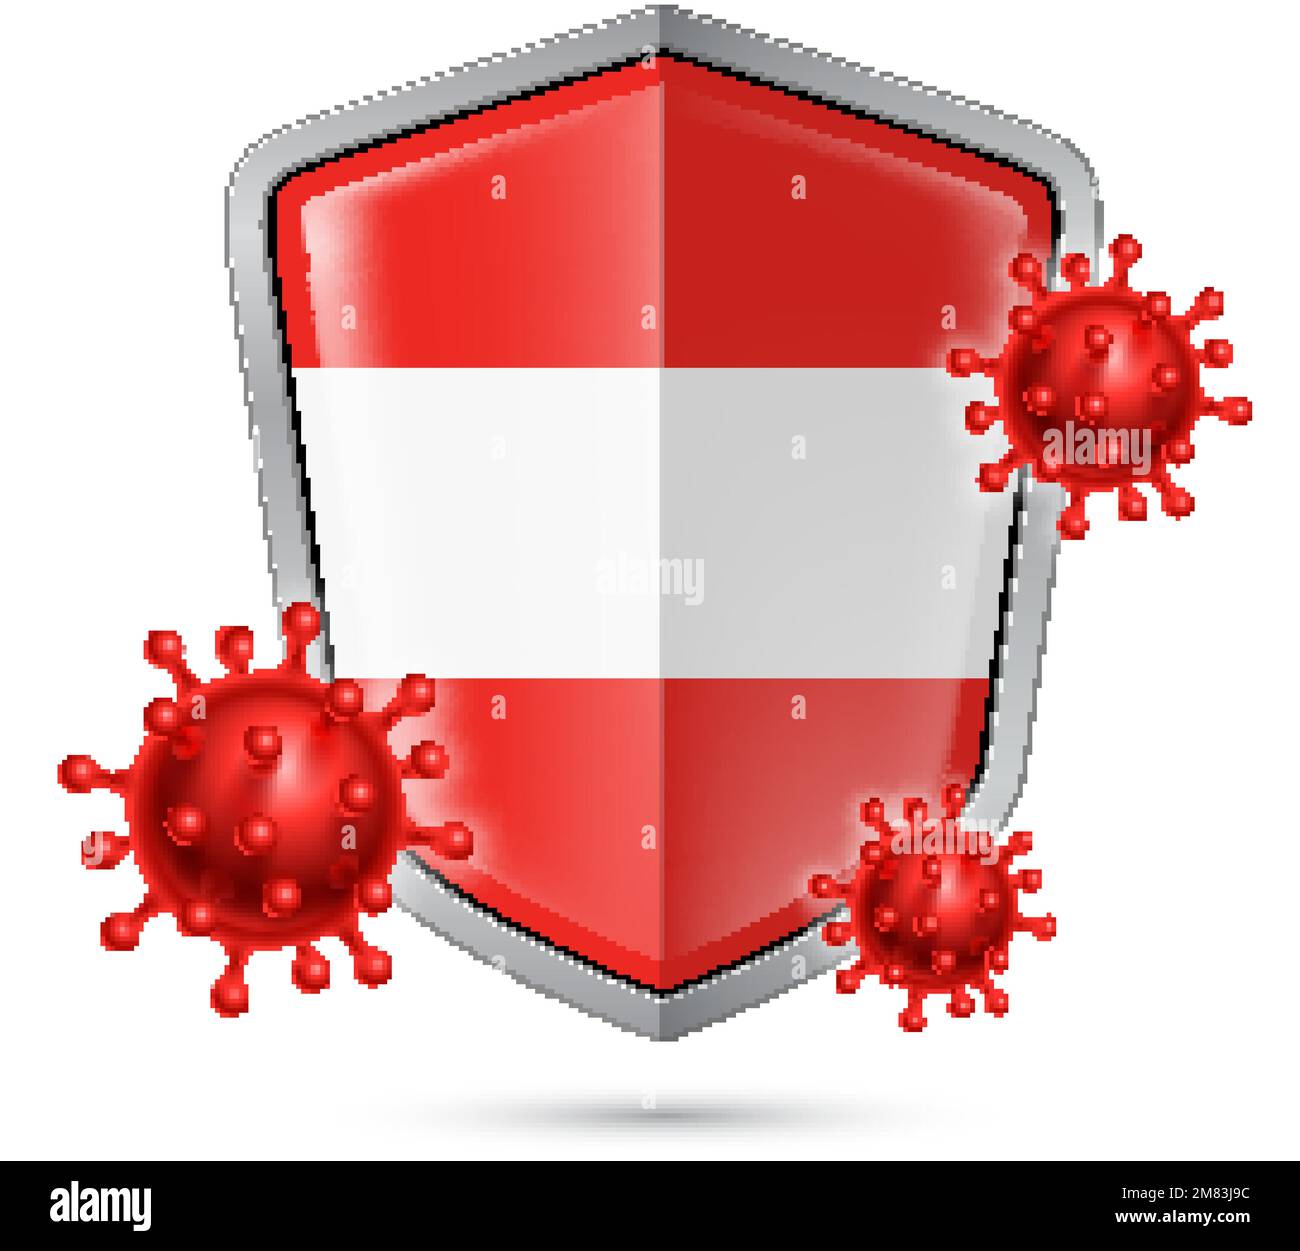 Flag of Austria on Metal Shiny Shield Icon and Red Corona Virus Cells. Concept of Health Care and Safety Badge. Security Safeguard Metal Label with Au Stock Vector